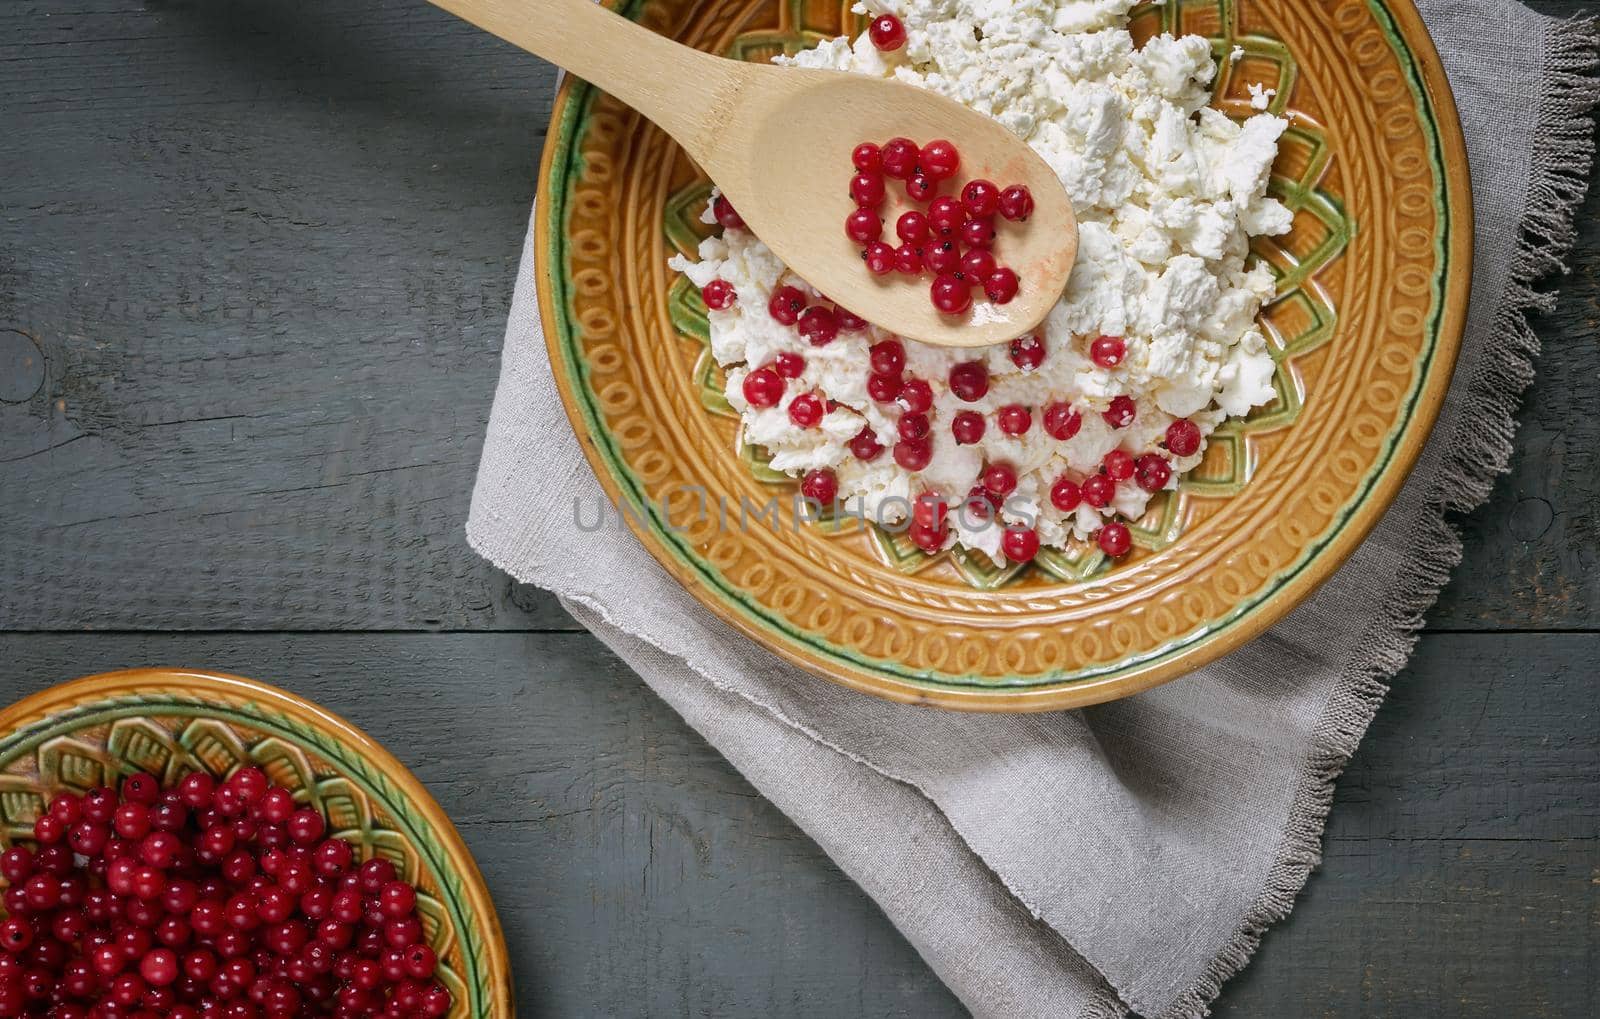 On the table in a ceramic plate delicious natural cottage cheese with red currant berries. close-up, top view. Copy space.